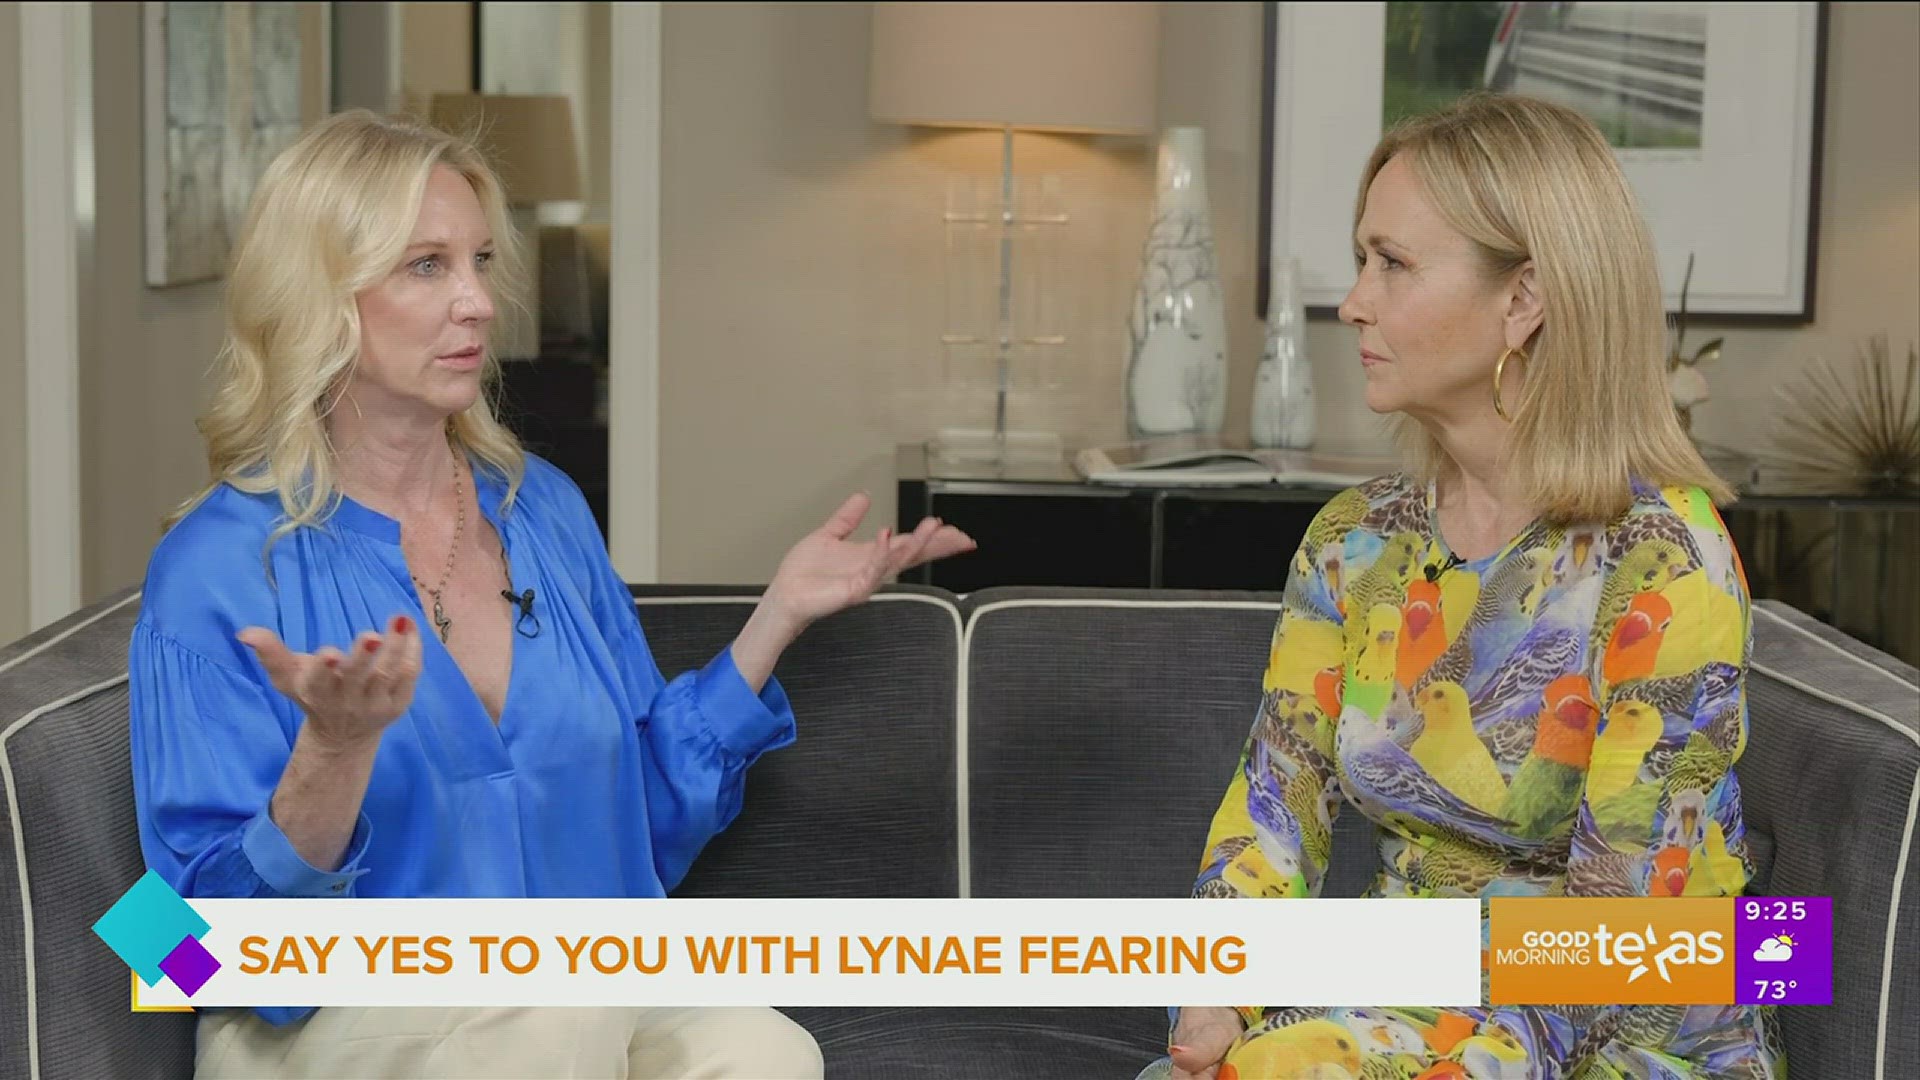 Lynae Fearing opens up to Jane about life's challenges and how she says yes to you.